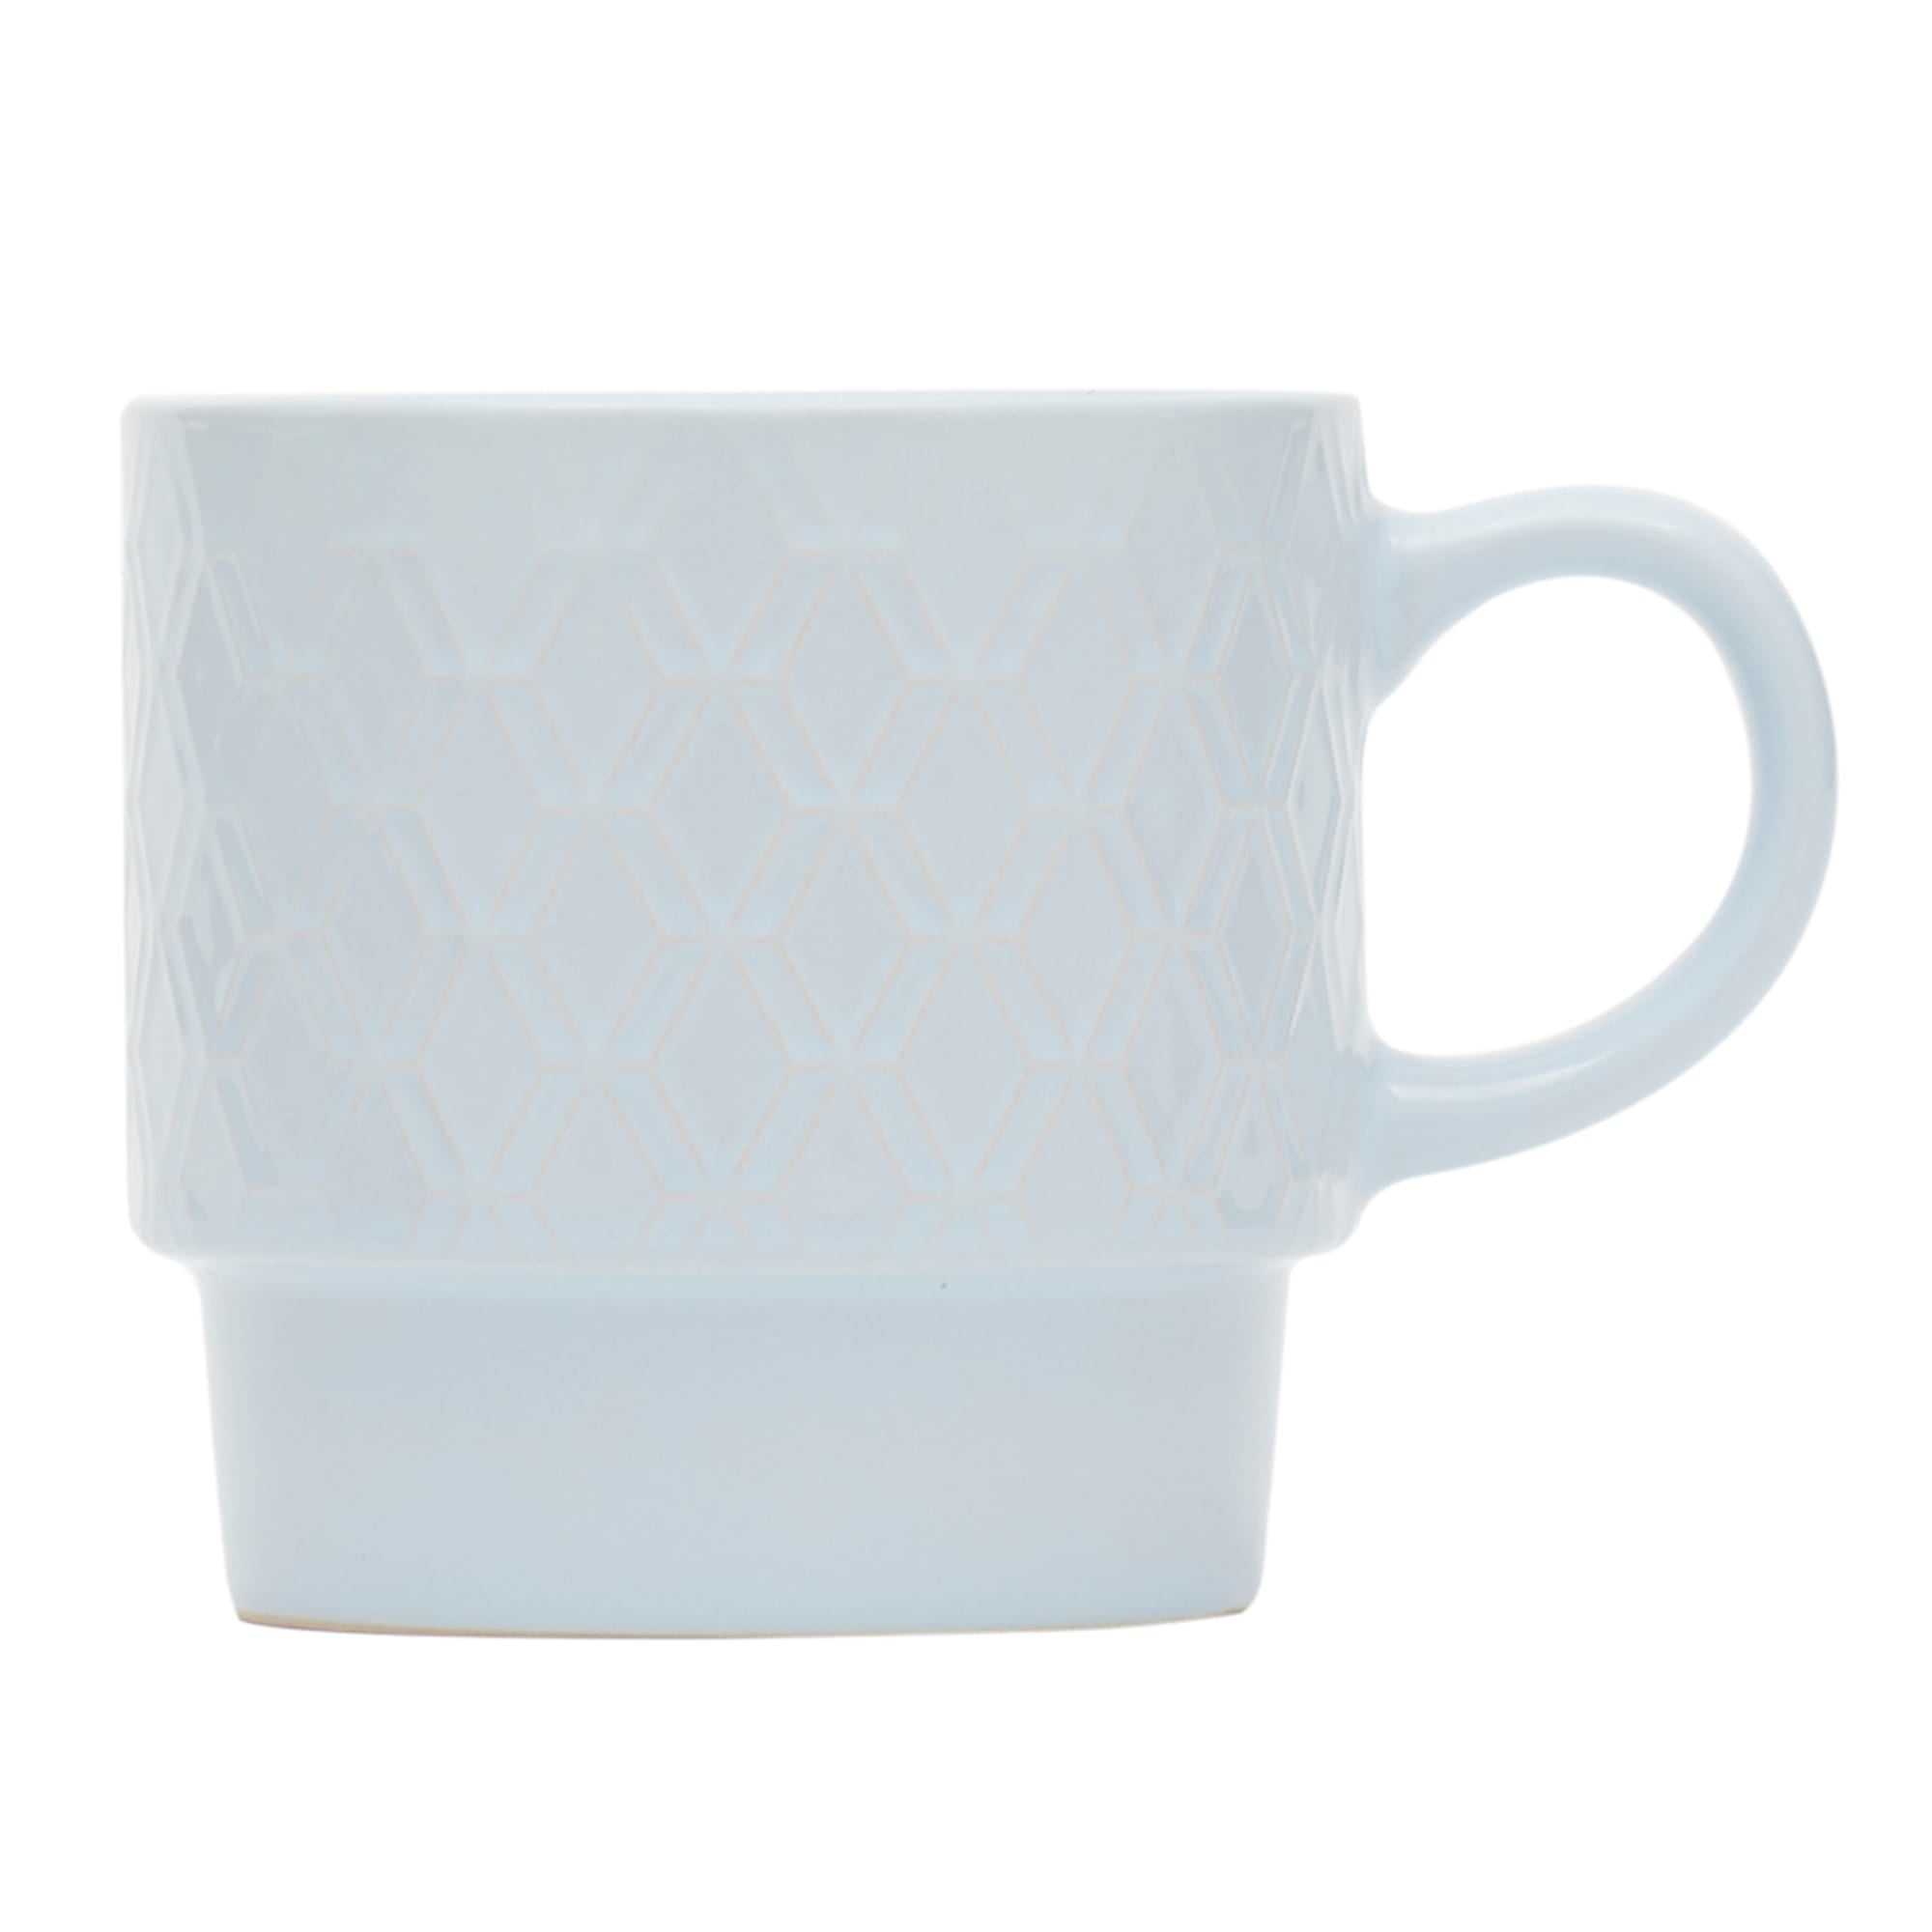 Home Basics Embossed Double Diamond 4 Piece Stackable Mug Set with Stand $10.00 EACH, CASE PACK OF 6